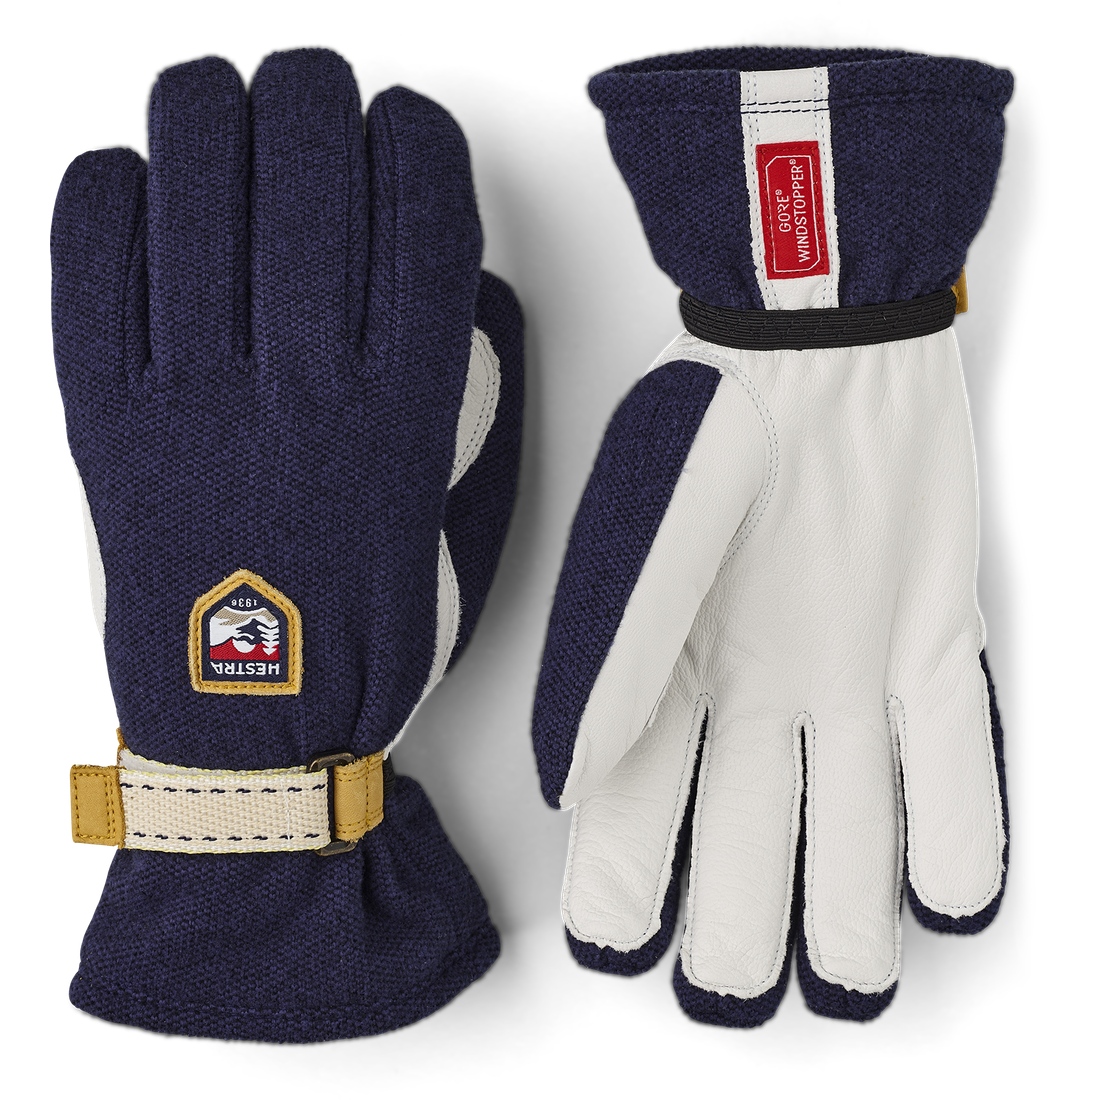 Picture of Hestra Windstopper Tour - 5 Finger Cross Country Gloves - navy